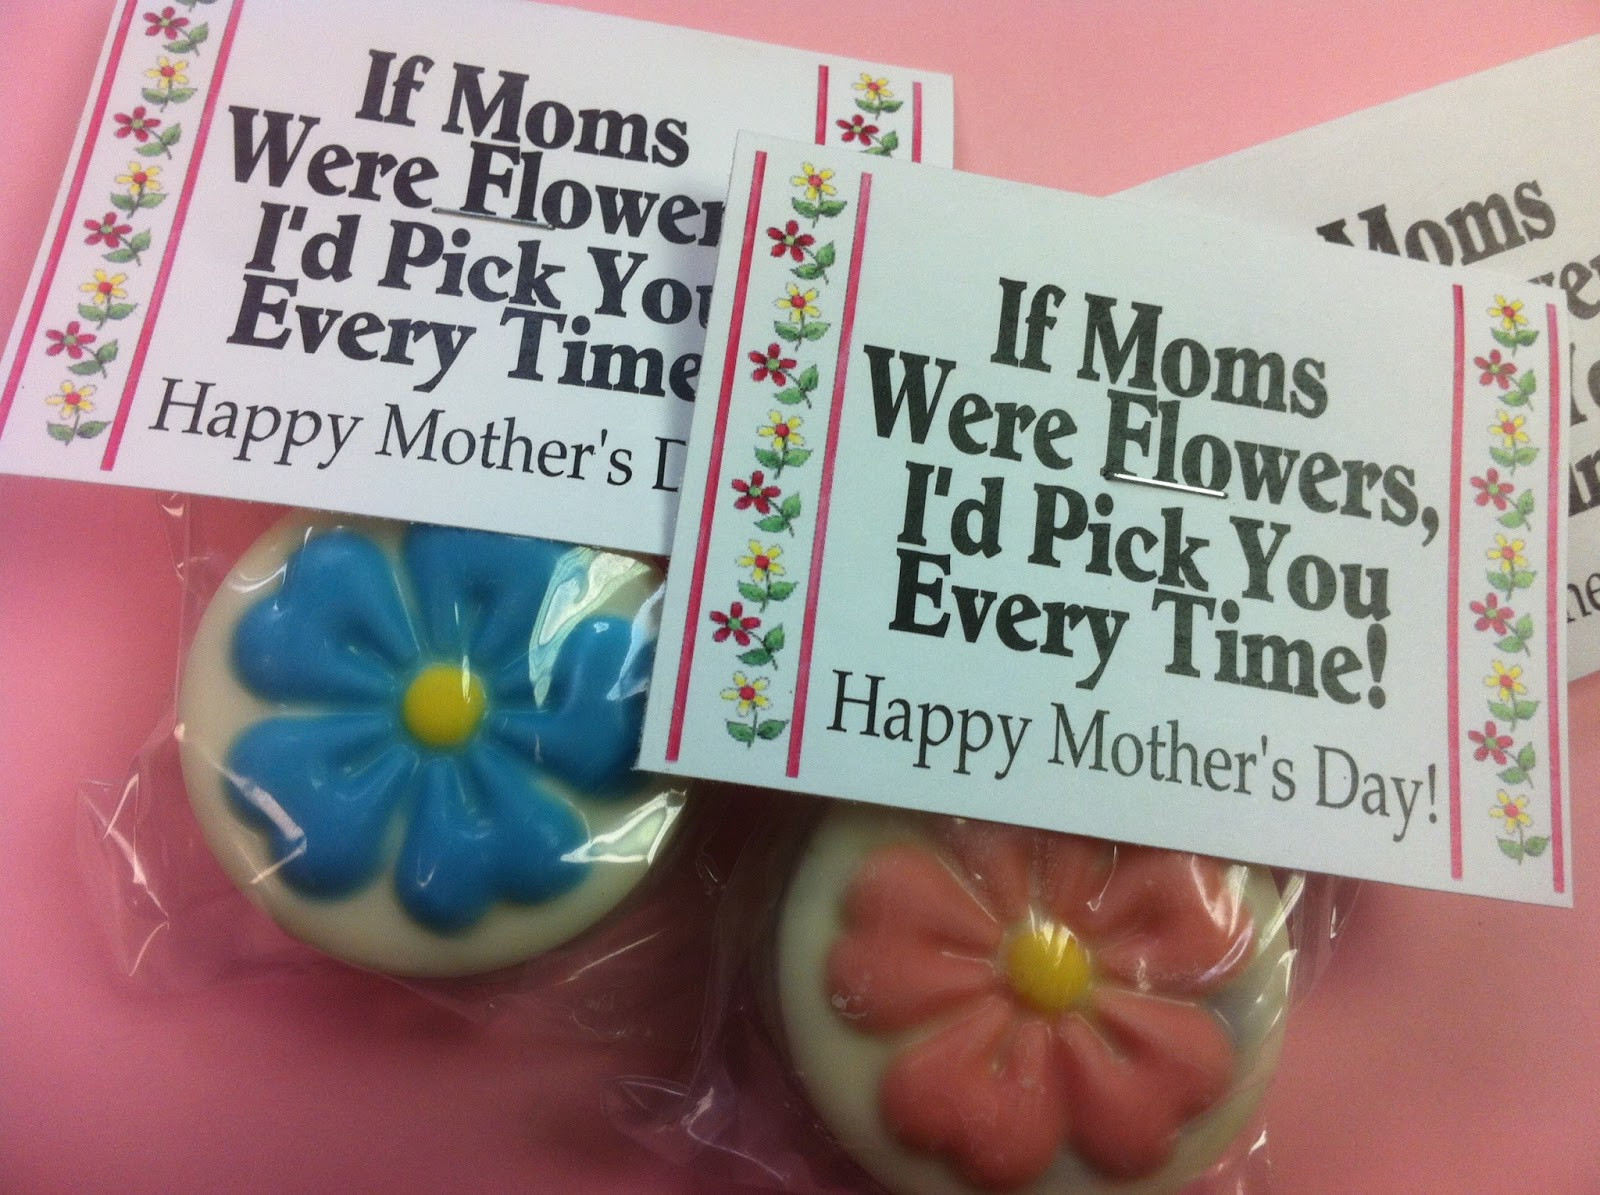 Mothers Day Ideas For Children's Church
 If Moms Were Flowers Candy Topper Printable